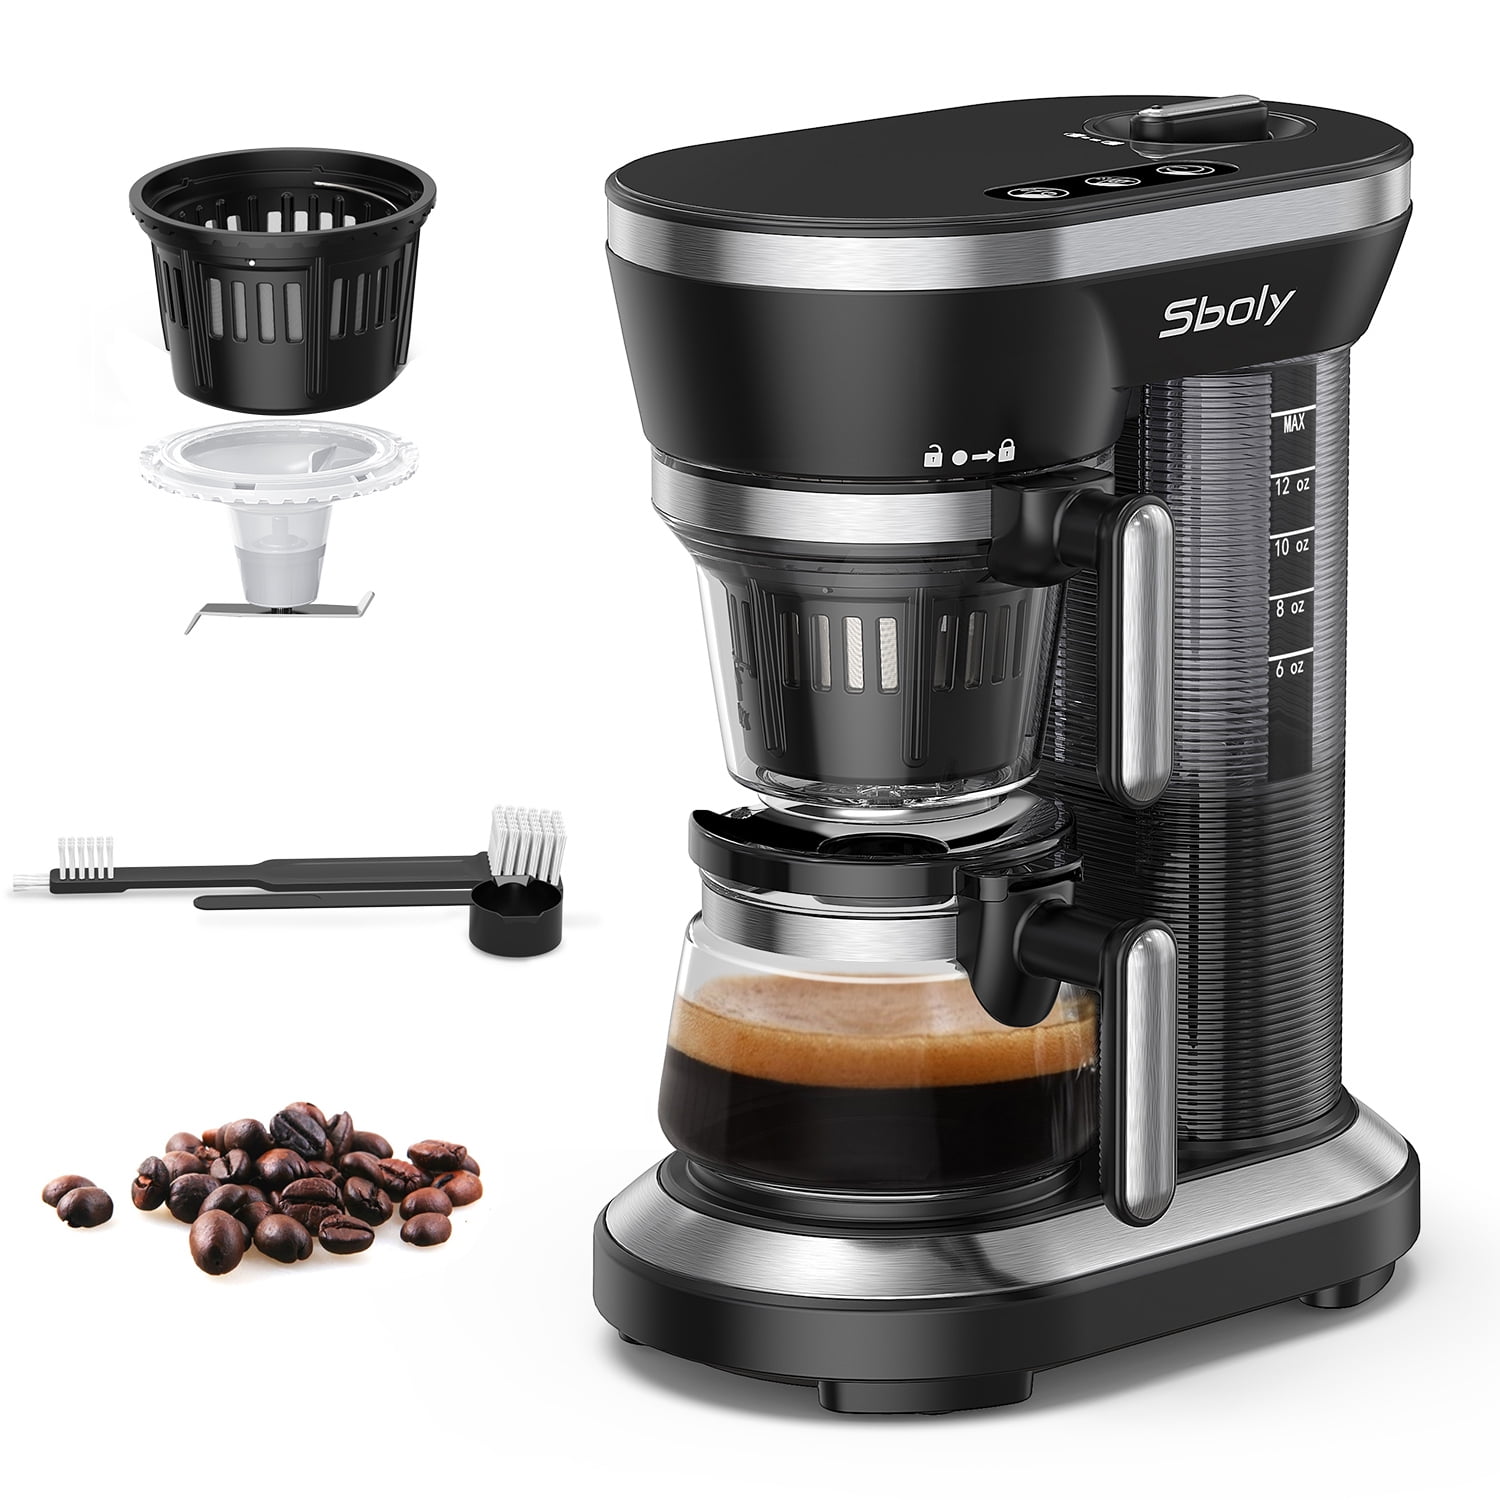 JAVASTARR Coffee Maker with Grinder Built in, Coffee Grinder and Maker All  in One, Bean to Cup Grind and Brew Coffee Maker, Capacity 12-15 Oz Steam